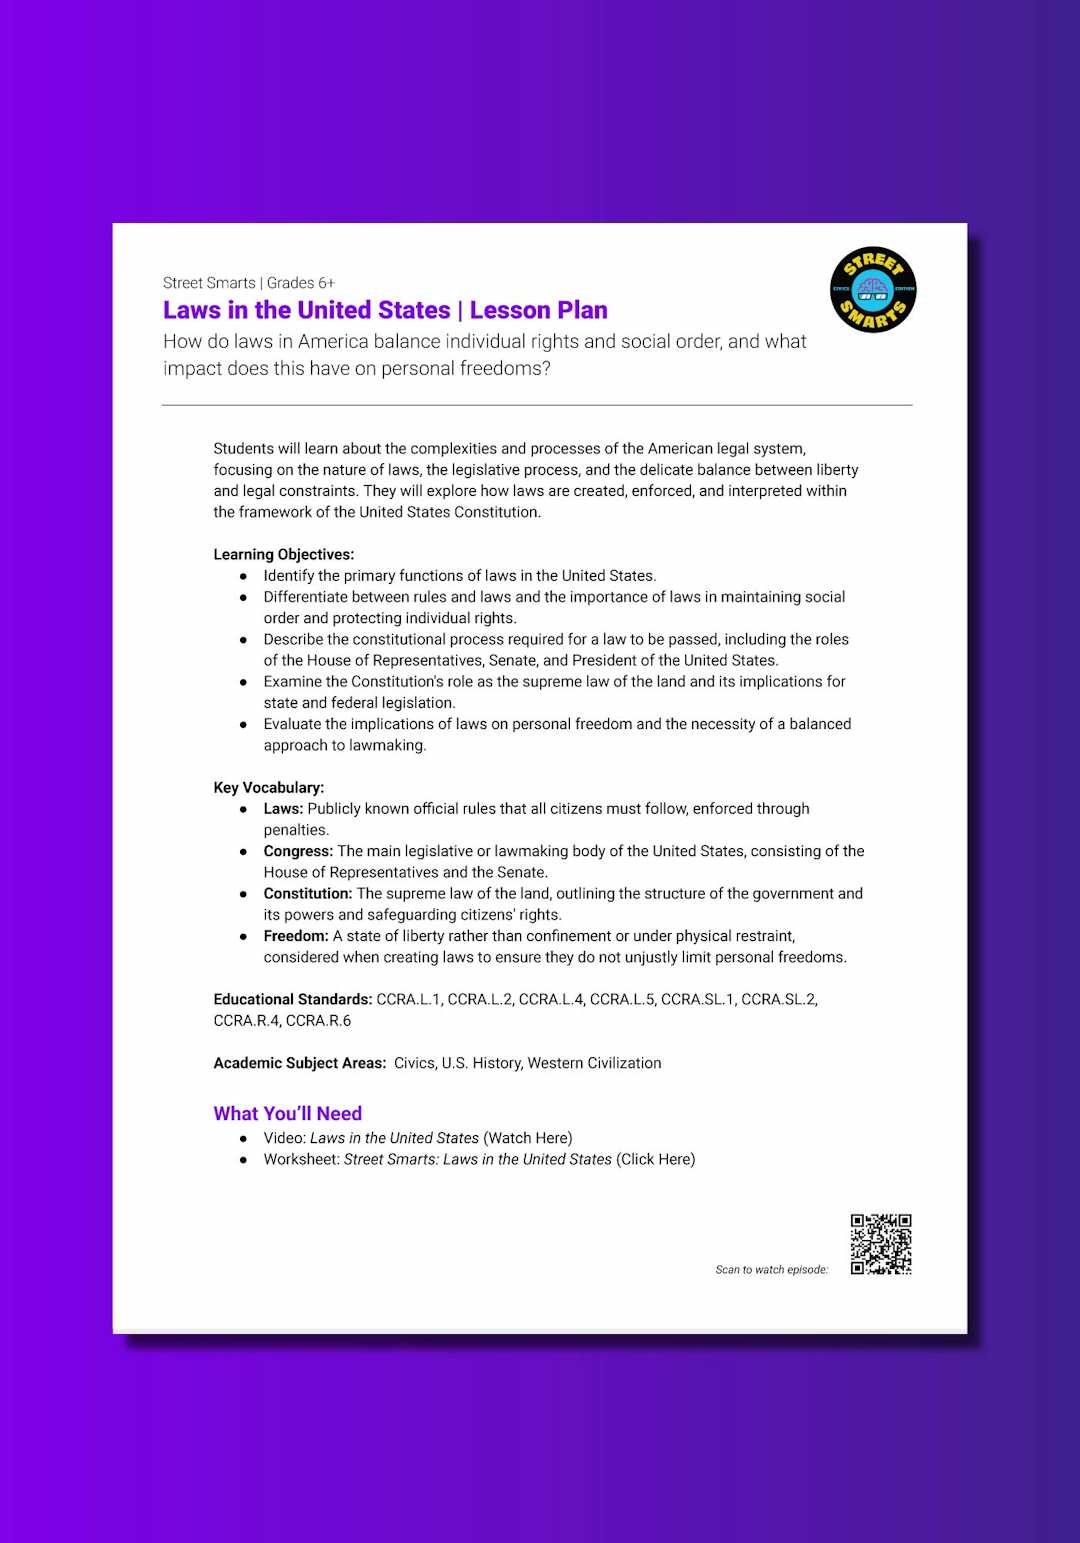 "Street Smarts: Laws in the United States" Lesson Plan